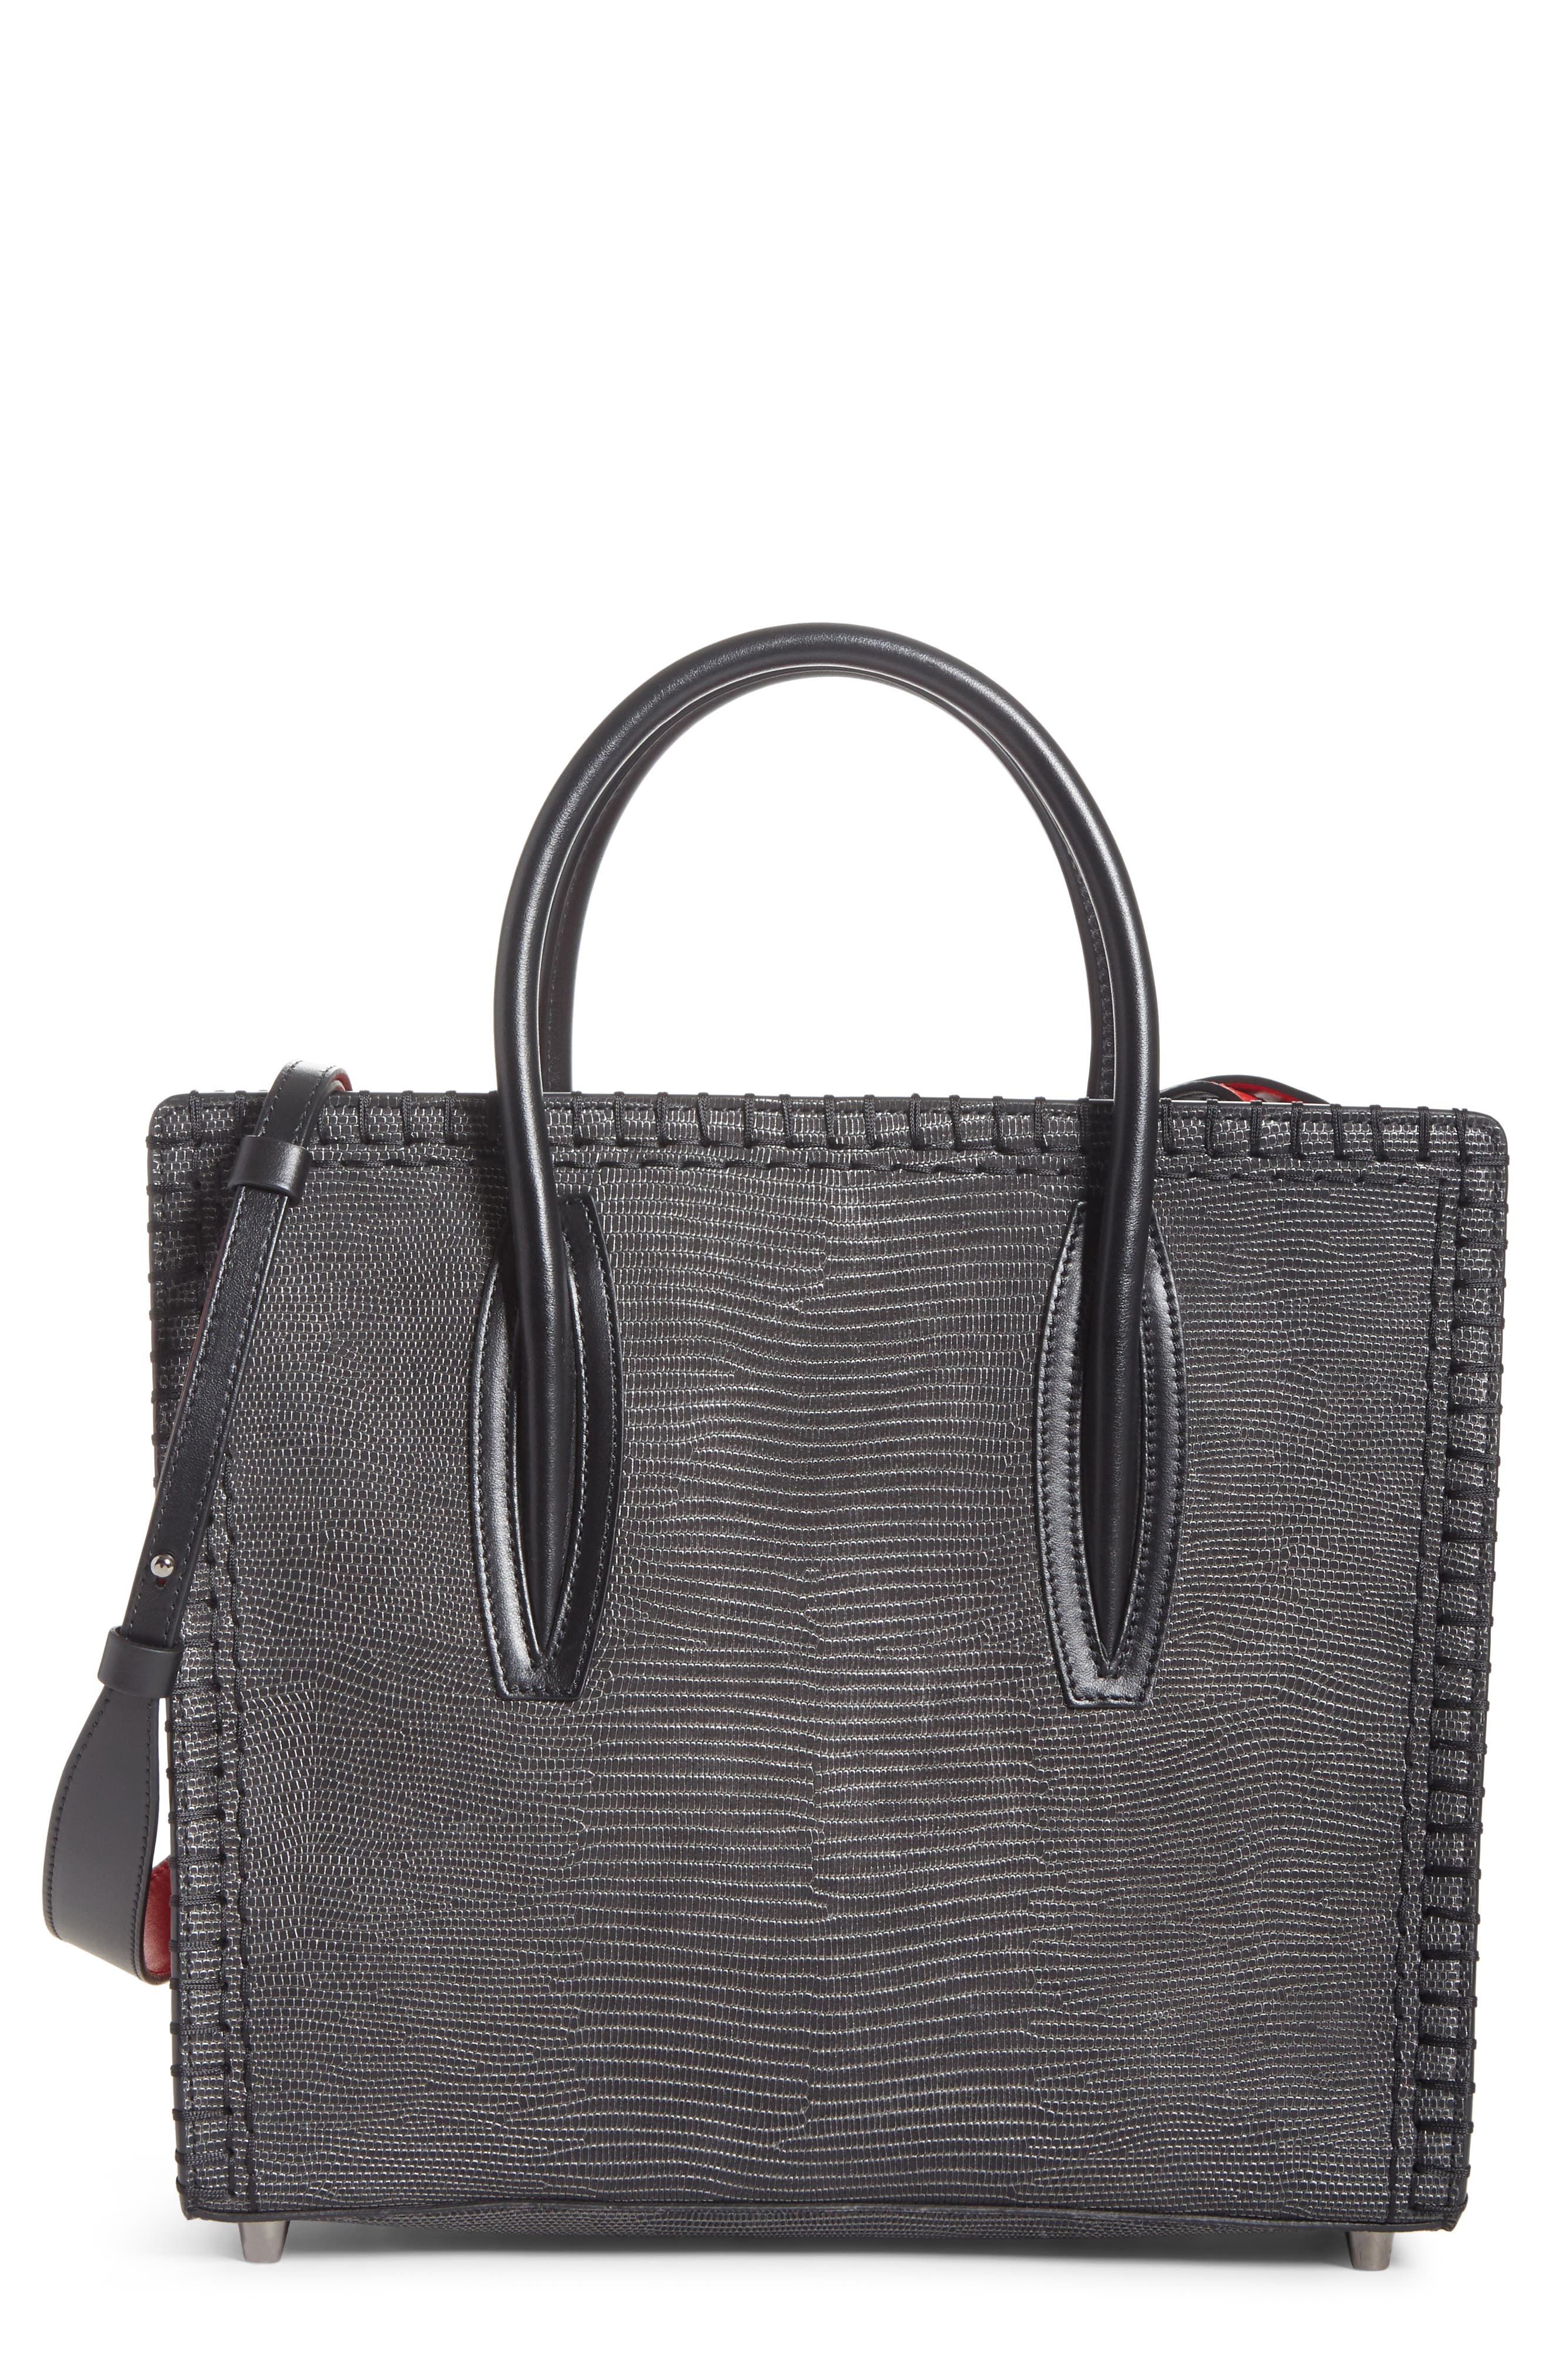 christian louboutin bags nordstrom